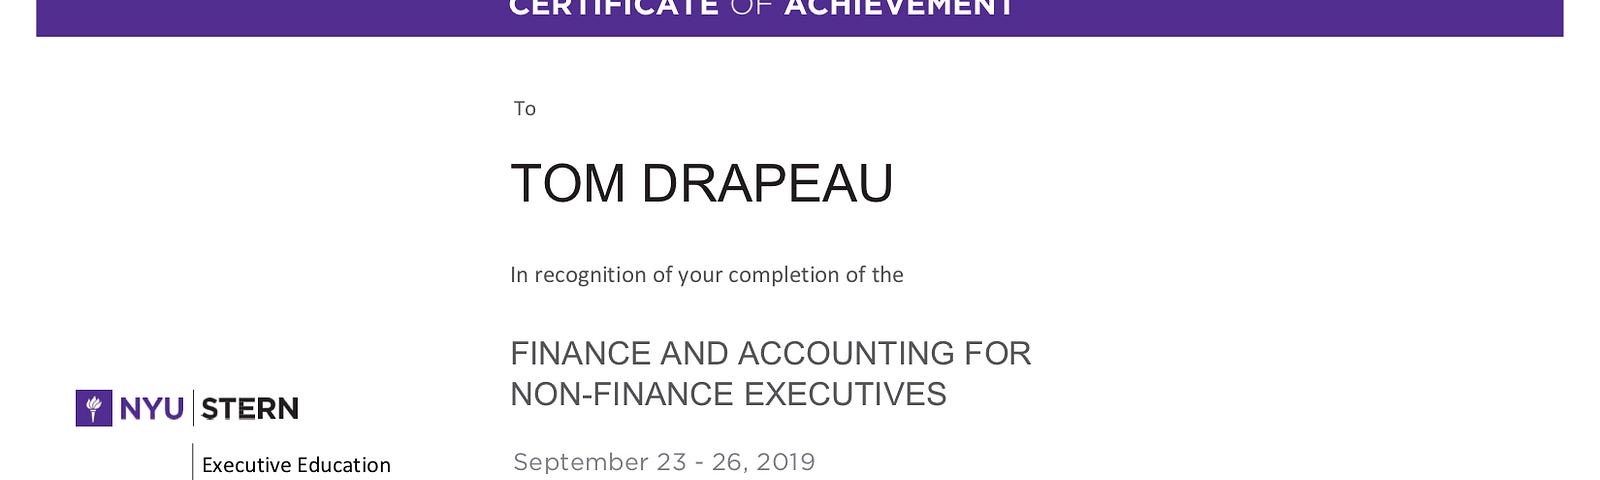 My completion certificate from the NYU Stern short course in Finance and Accounting.